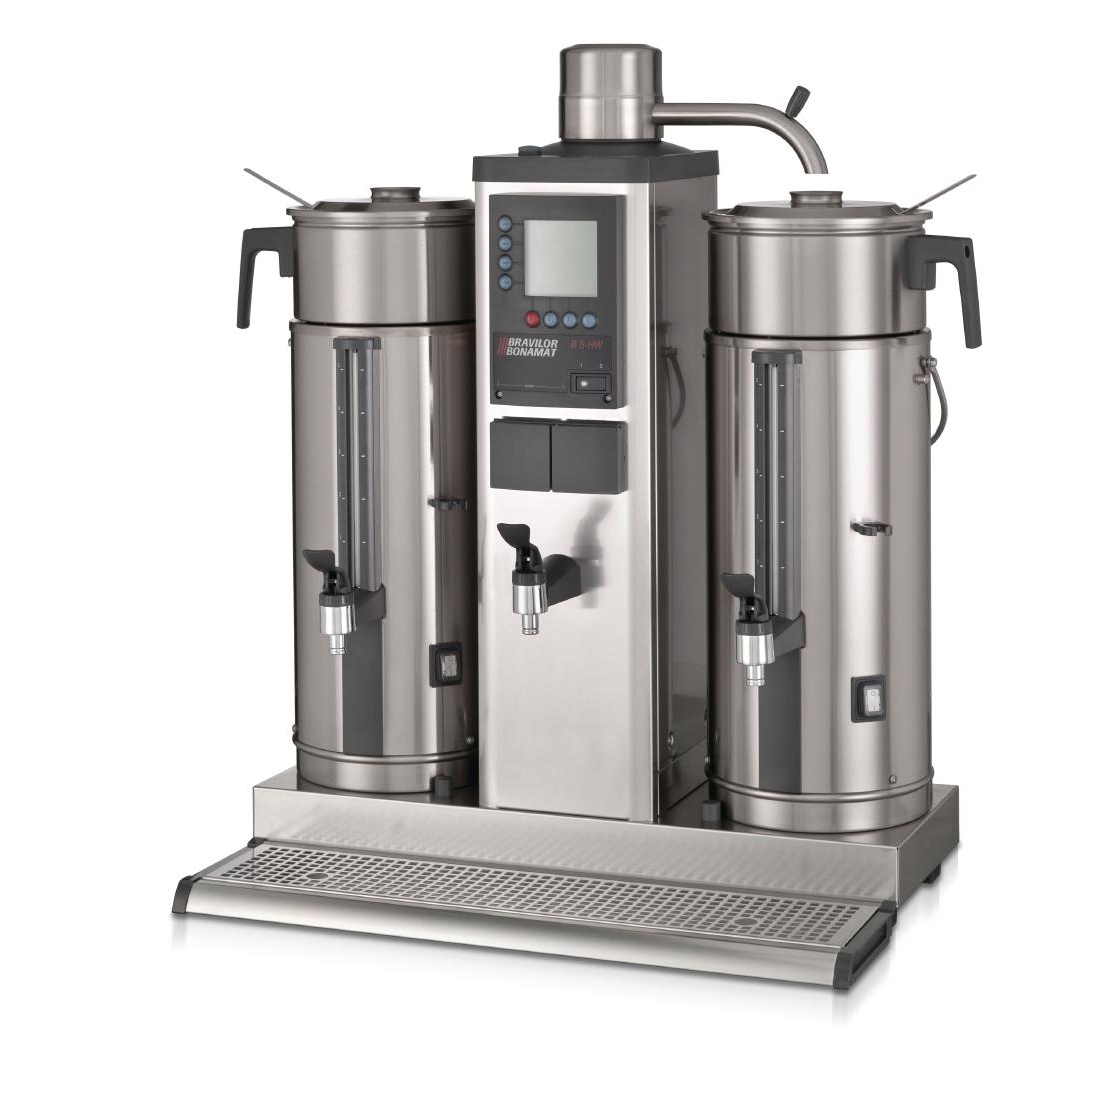 Bravilor B5 HW Bulk Coffee Brewer with 2x5Ltr Coffee Urns and Hot Water Tap Three Phase